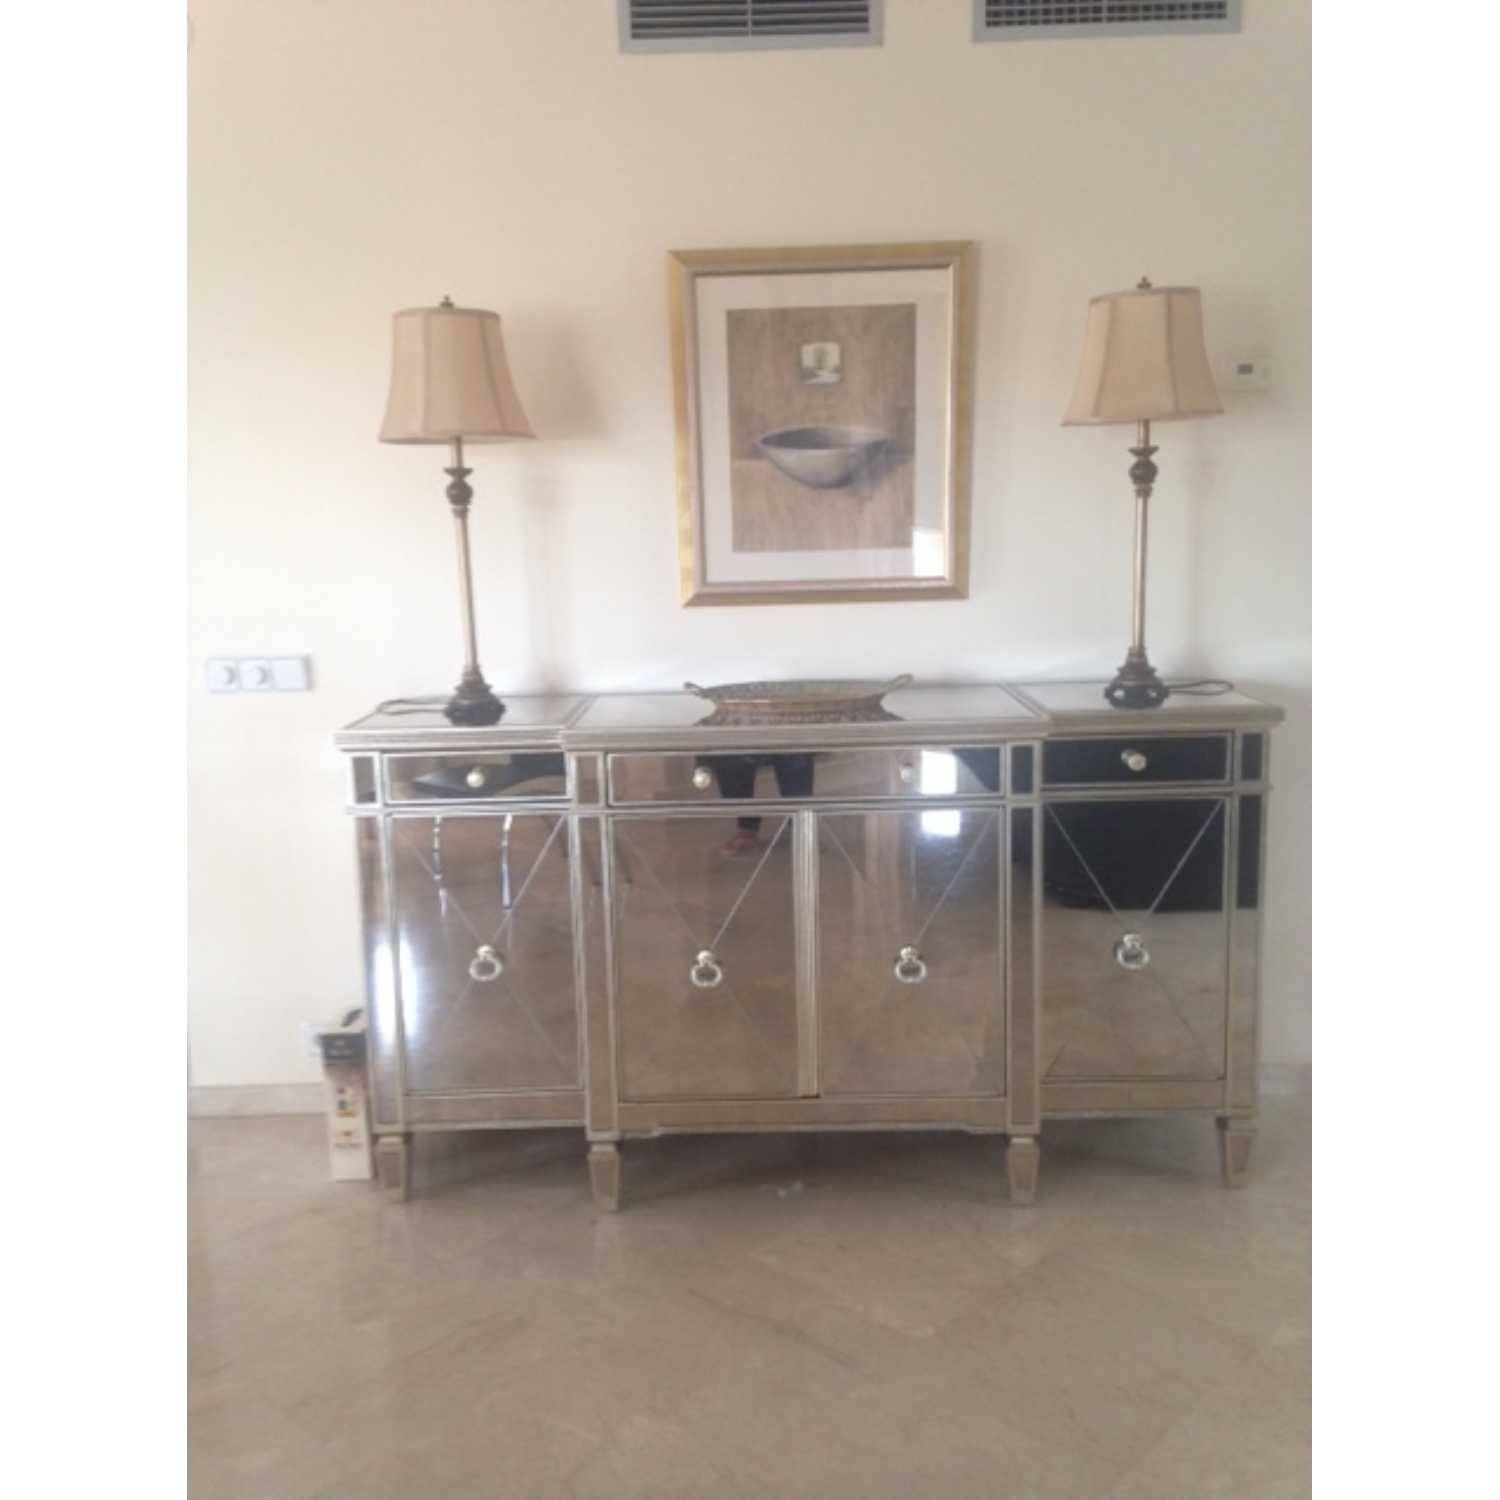 Large Antique Seville Venetian Mirrored Glass Sideboard 4 Door Intended For Glass Sideboard (View 2 of 20)